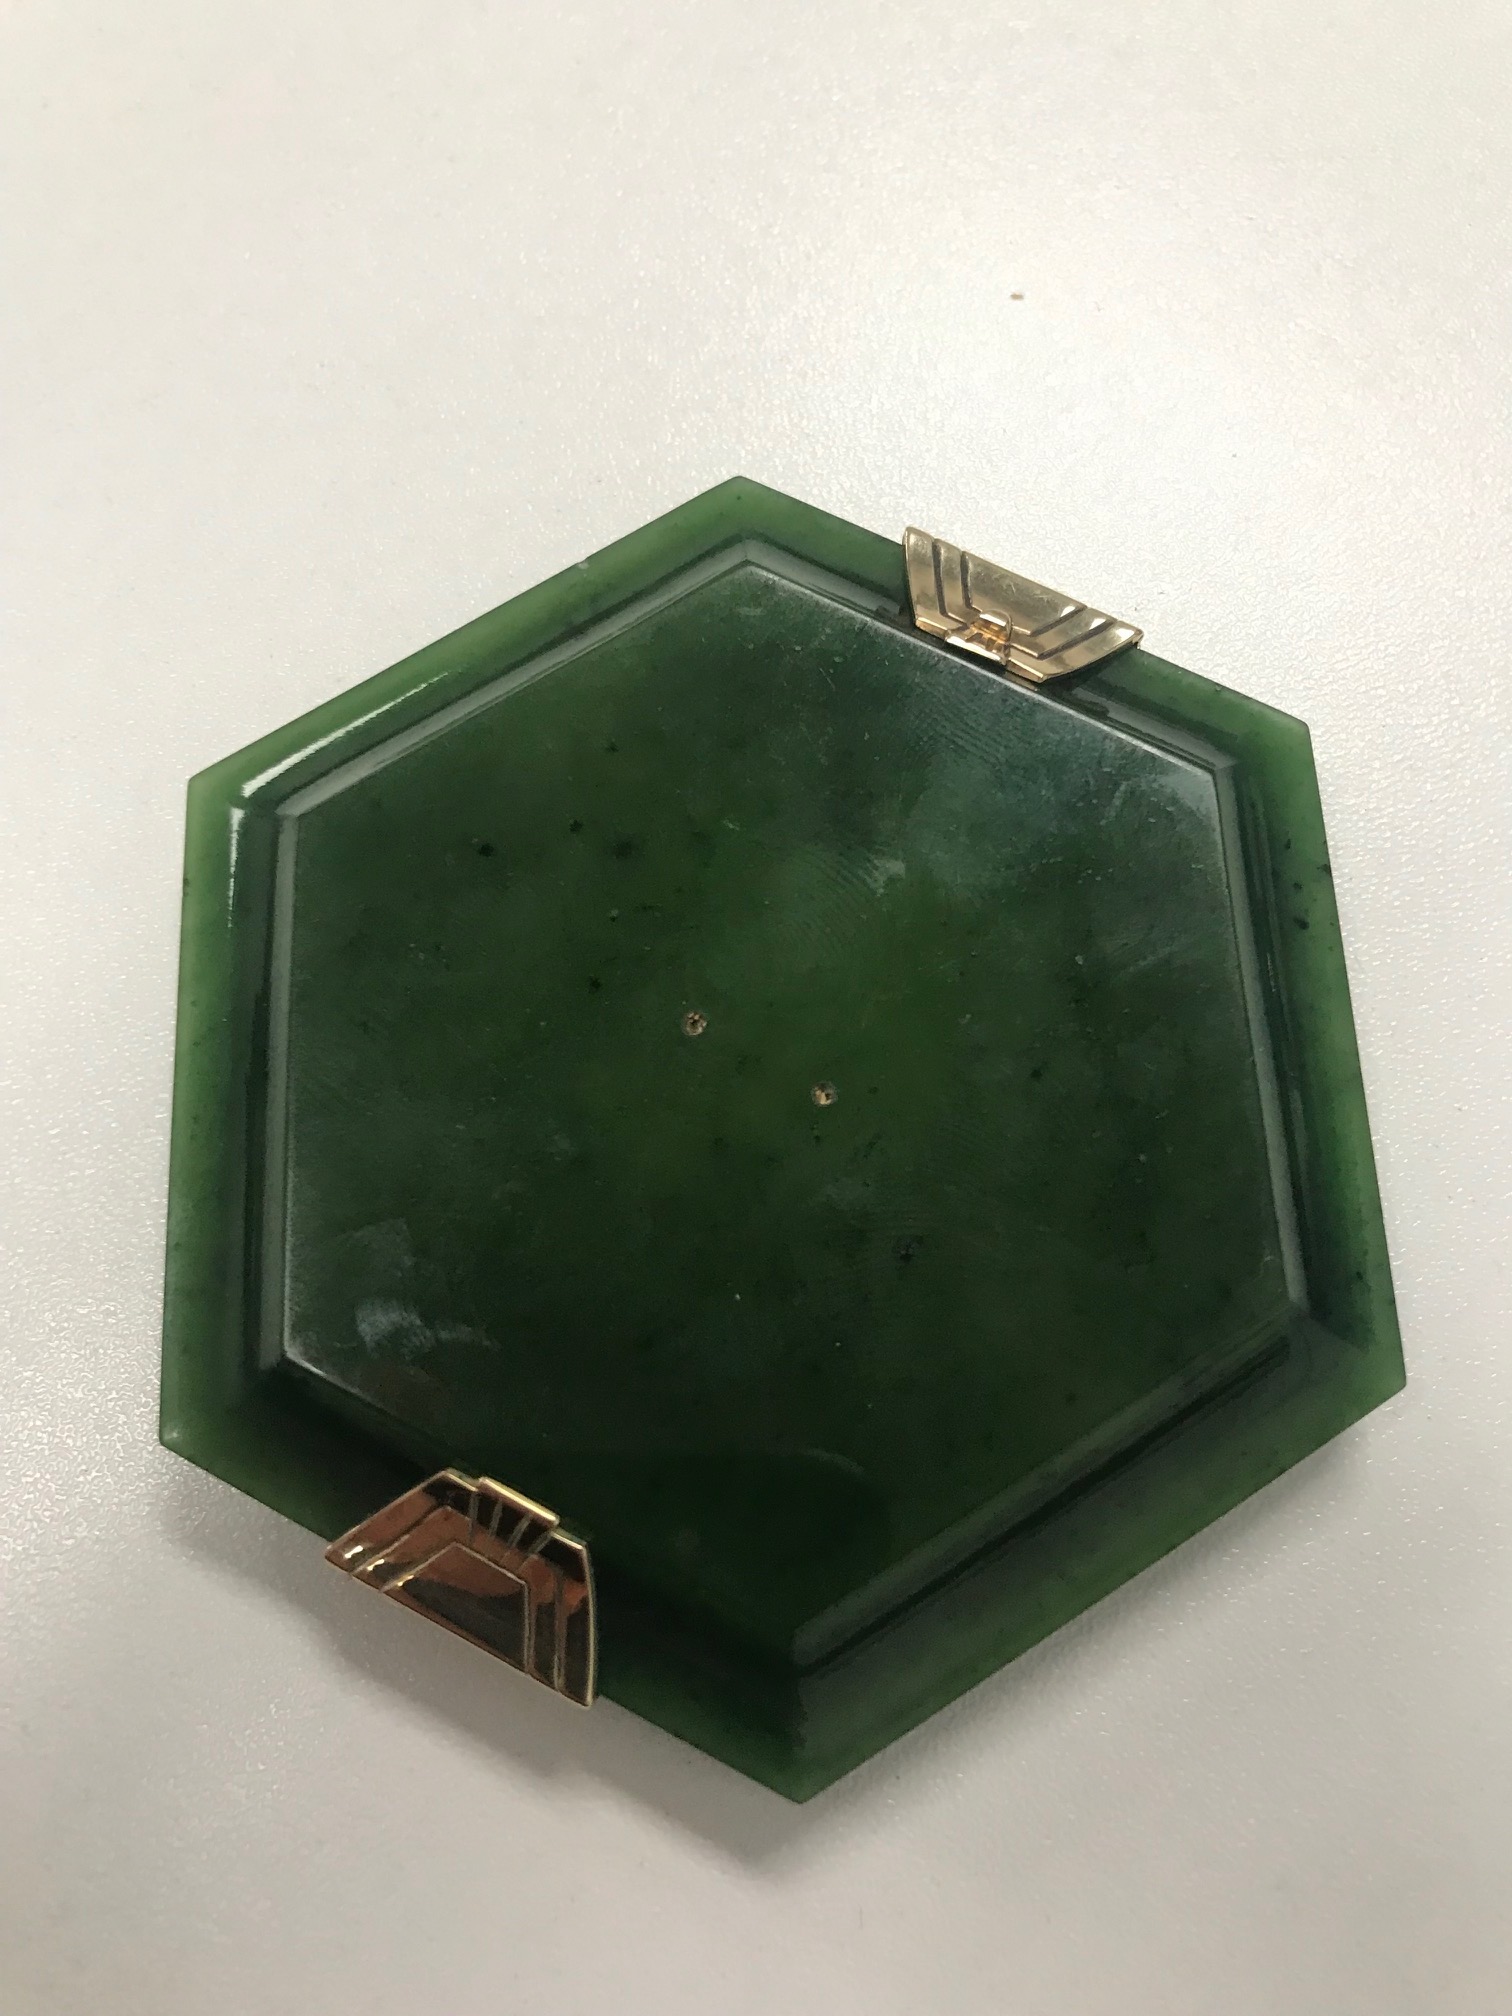 An Art Deco Dunhill nephrite powder compact - Image 6 of 7